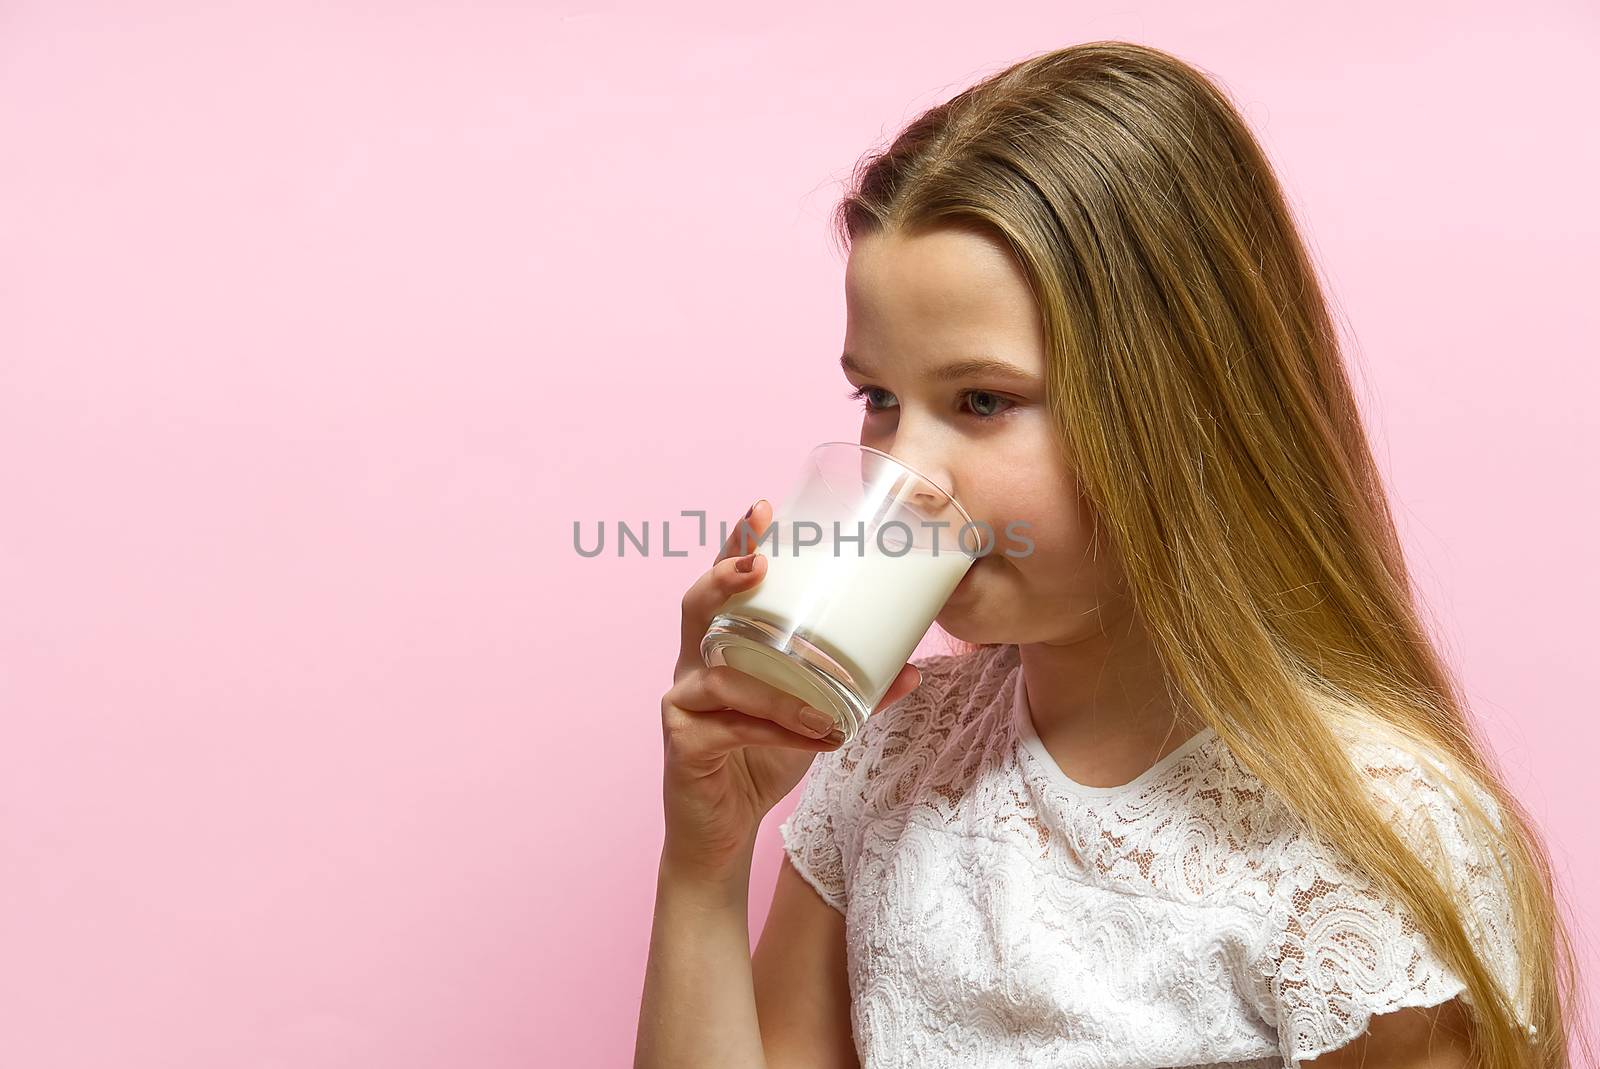 girl with pigtails and milk mustache drinks milk on pink background. by PhotoTime